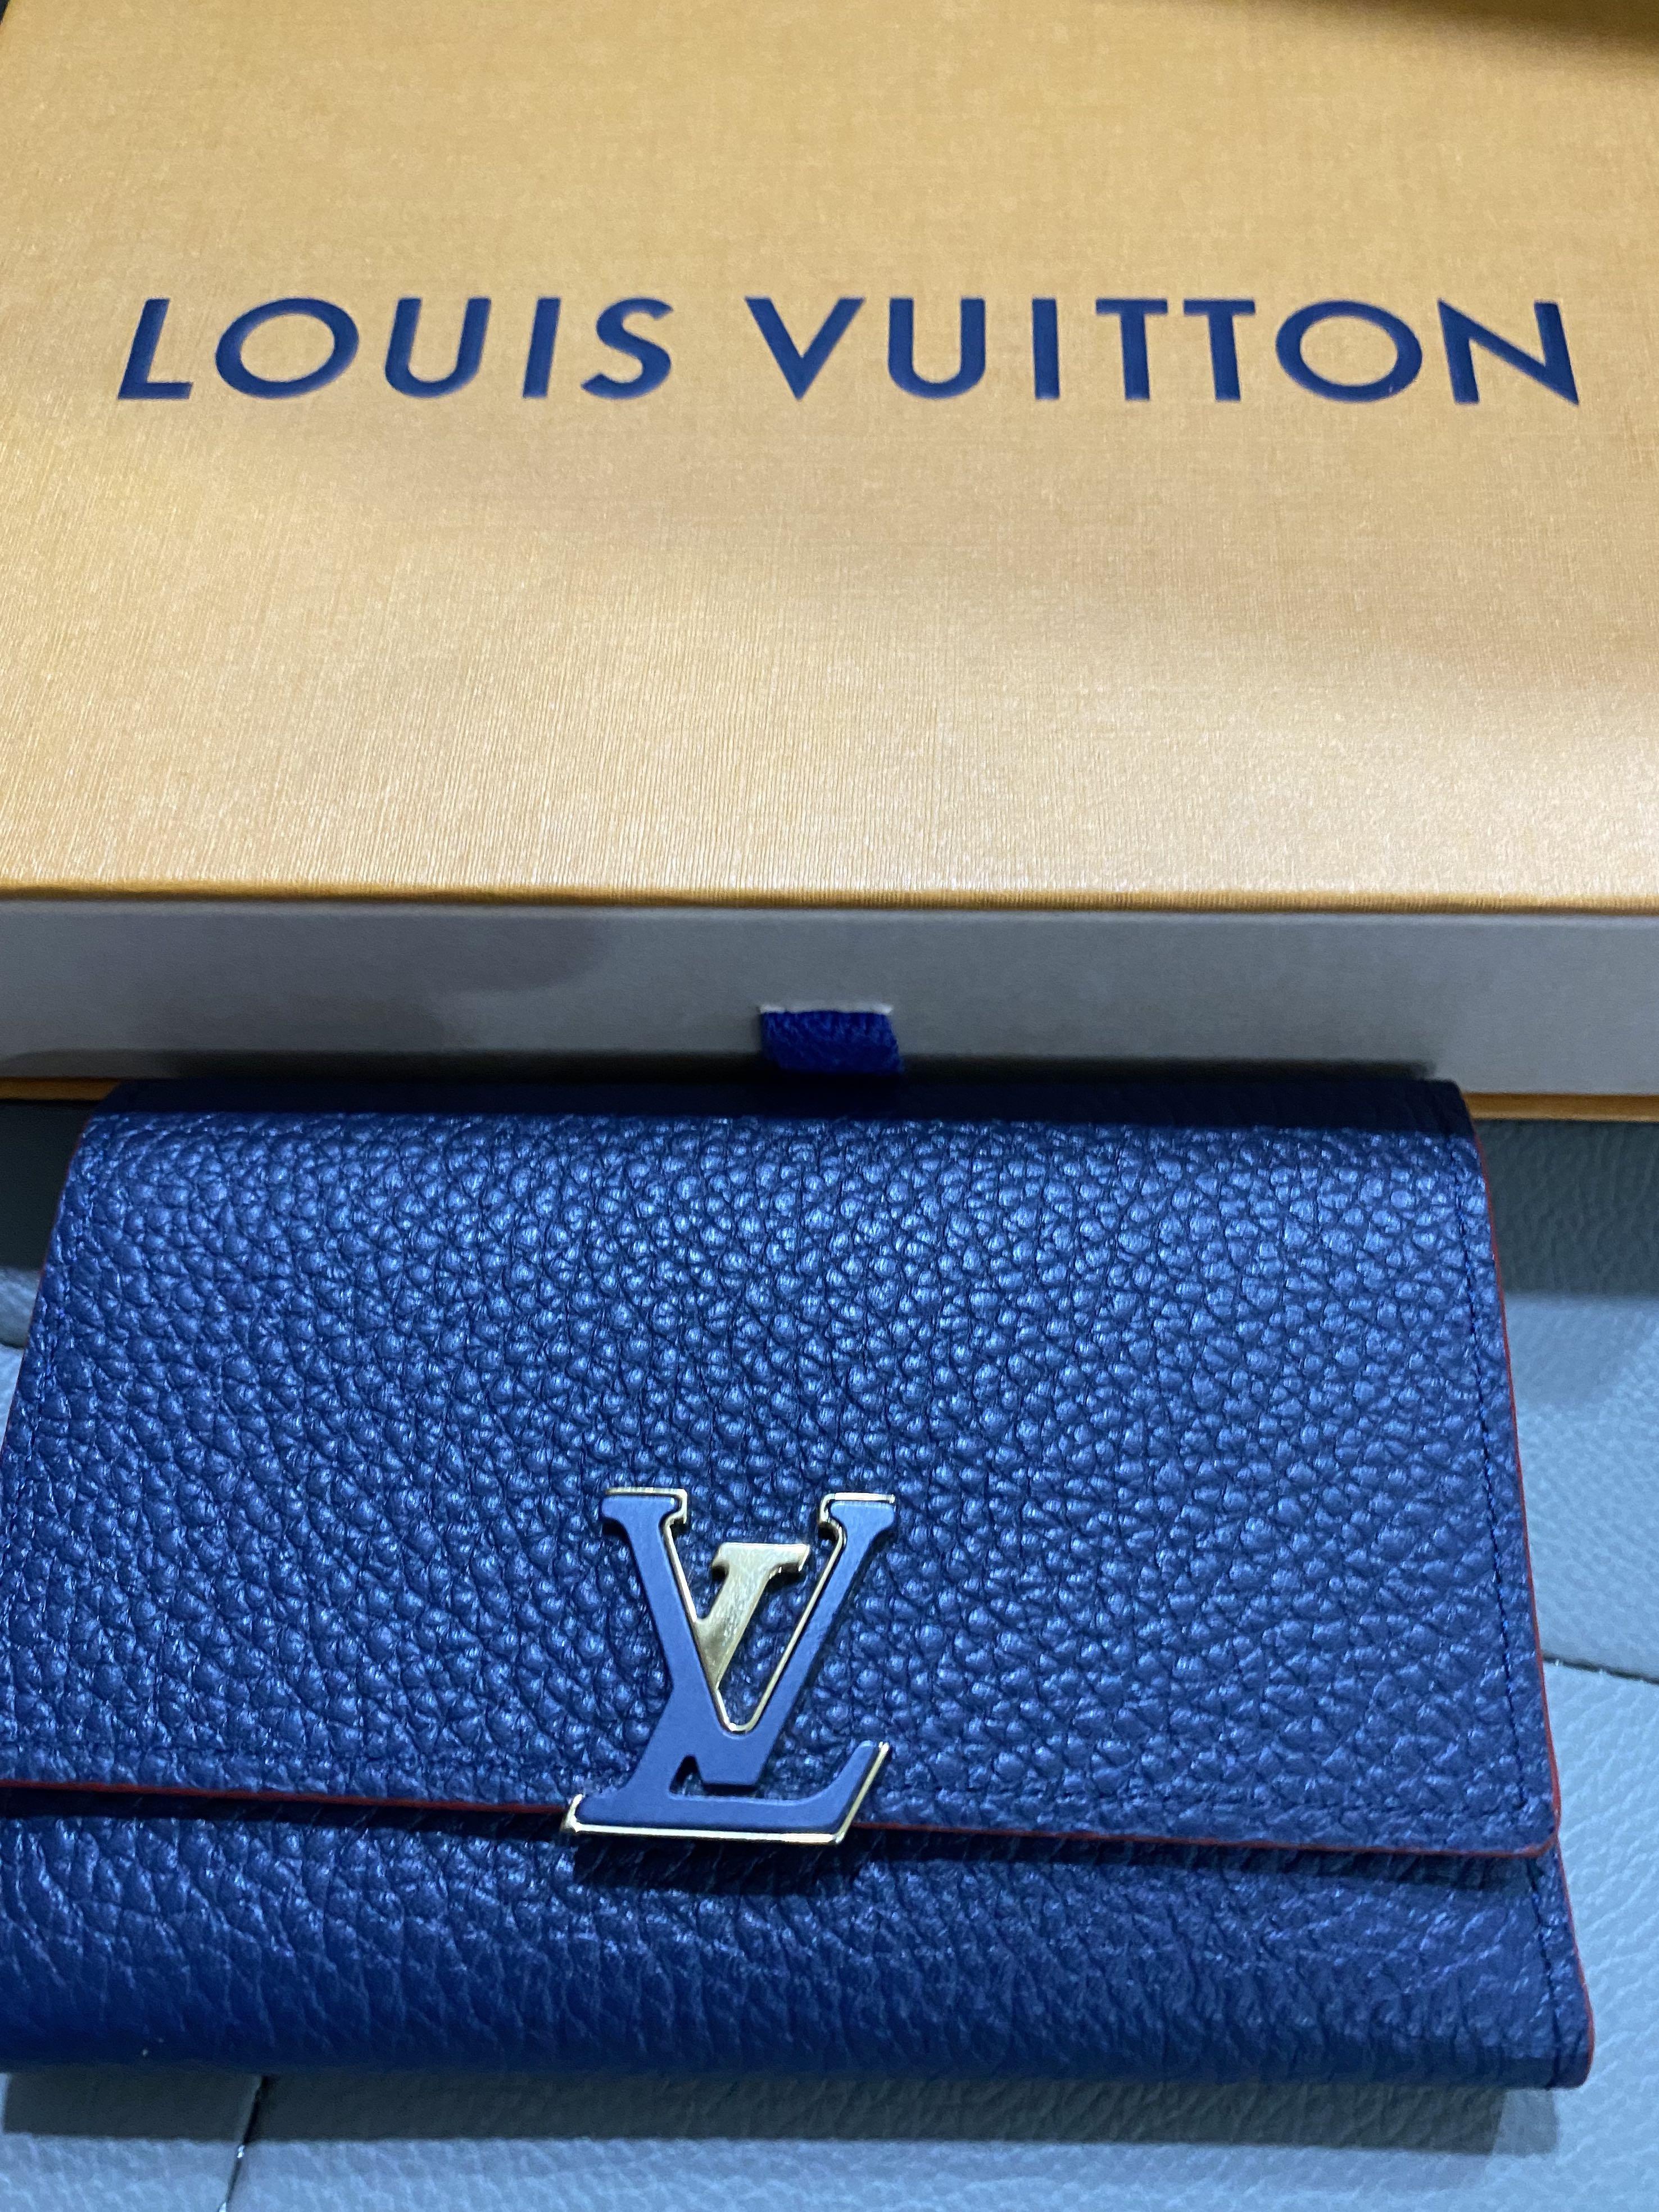 LOUIS VUITTON CAPUCINES COMPACT WALLET TAURILLON LEATHER Like New